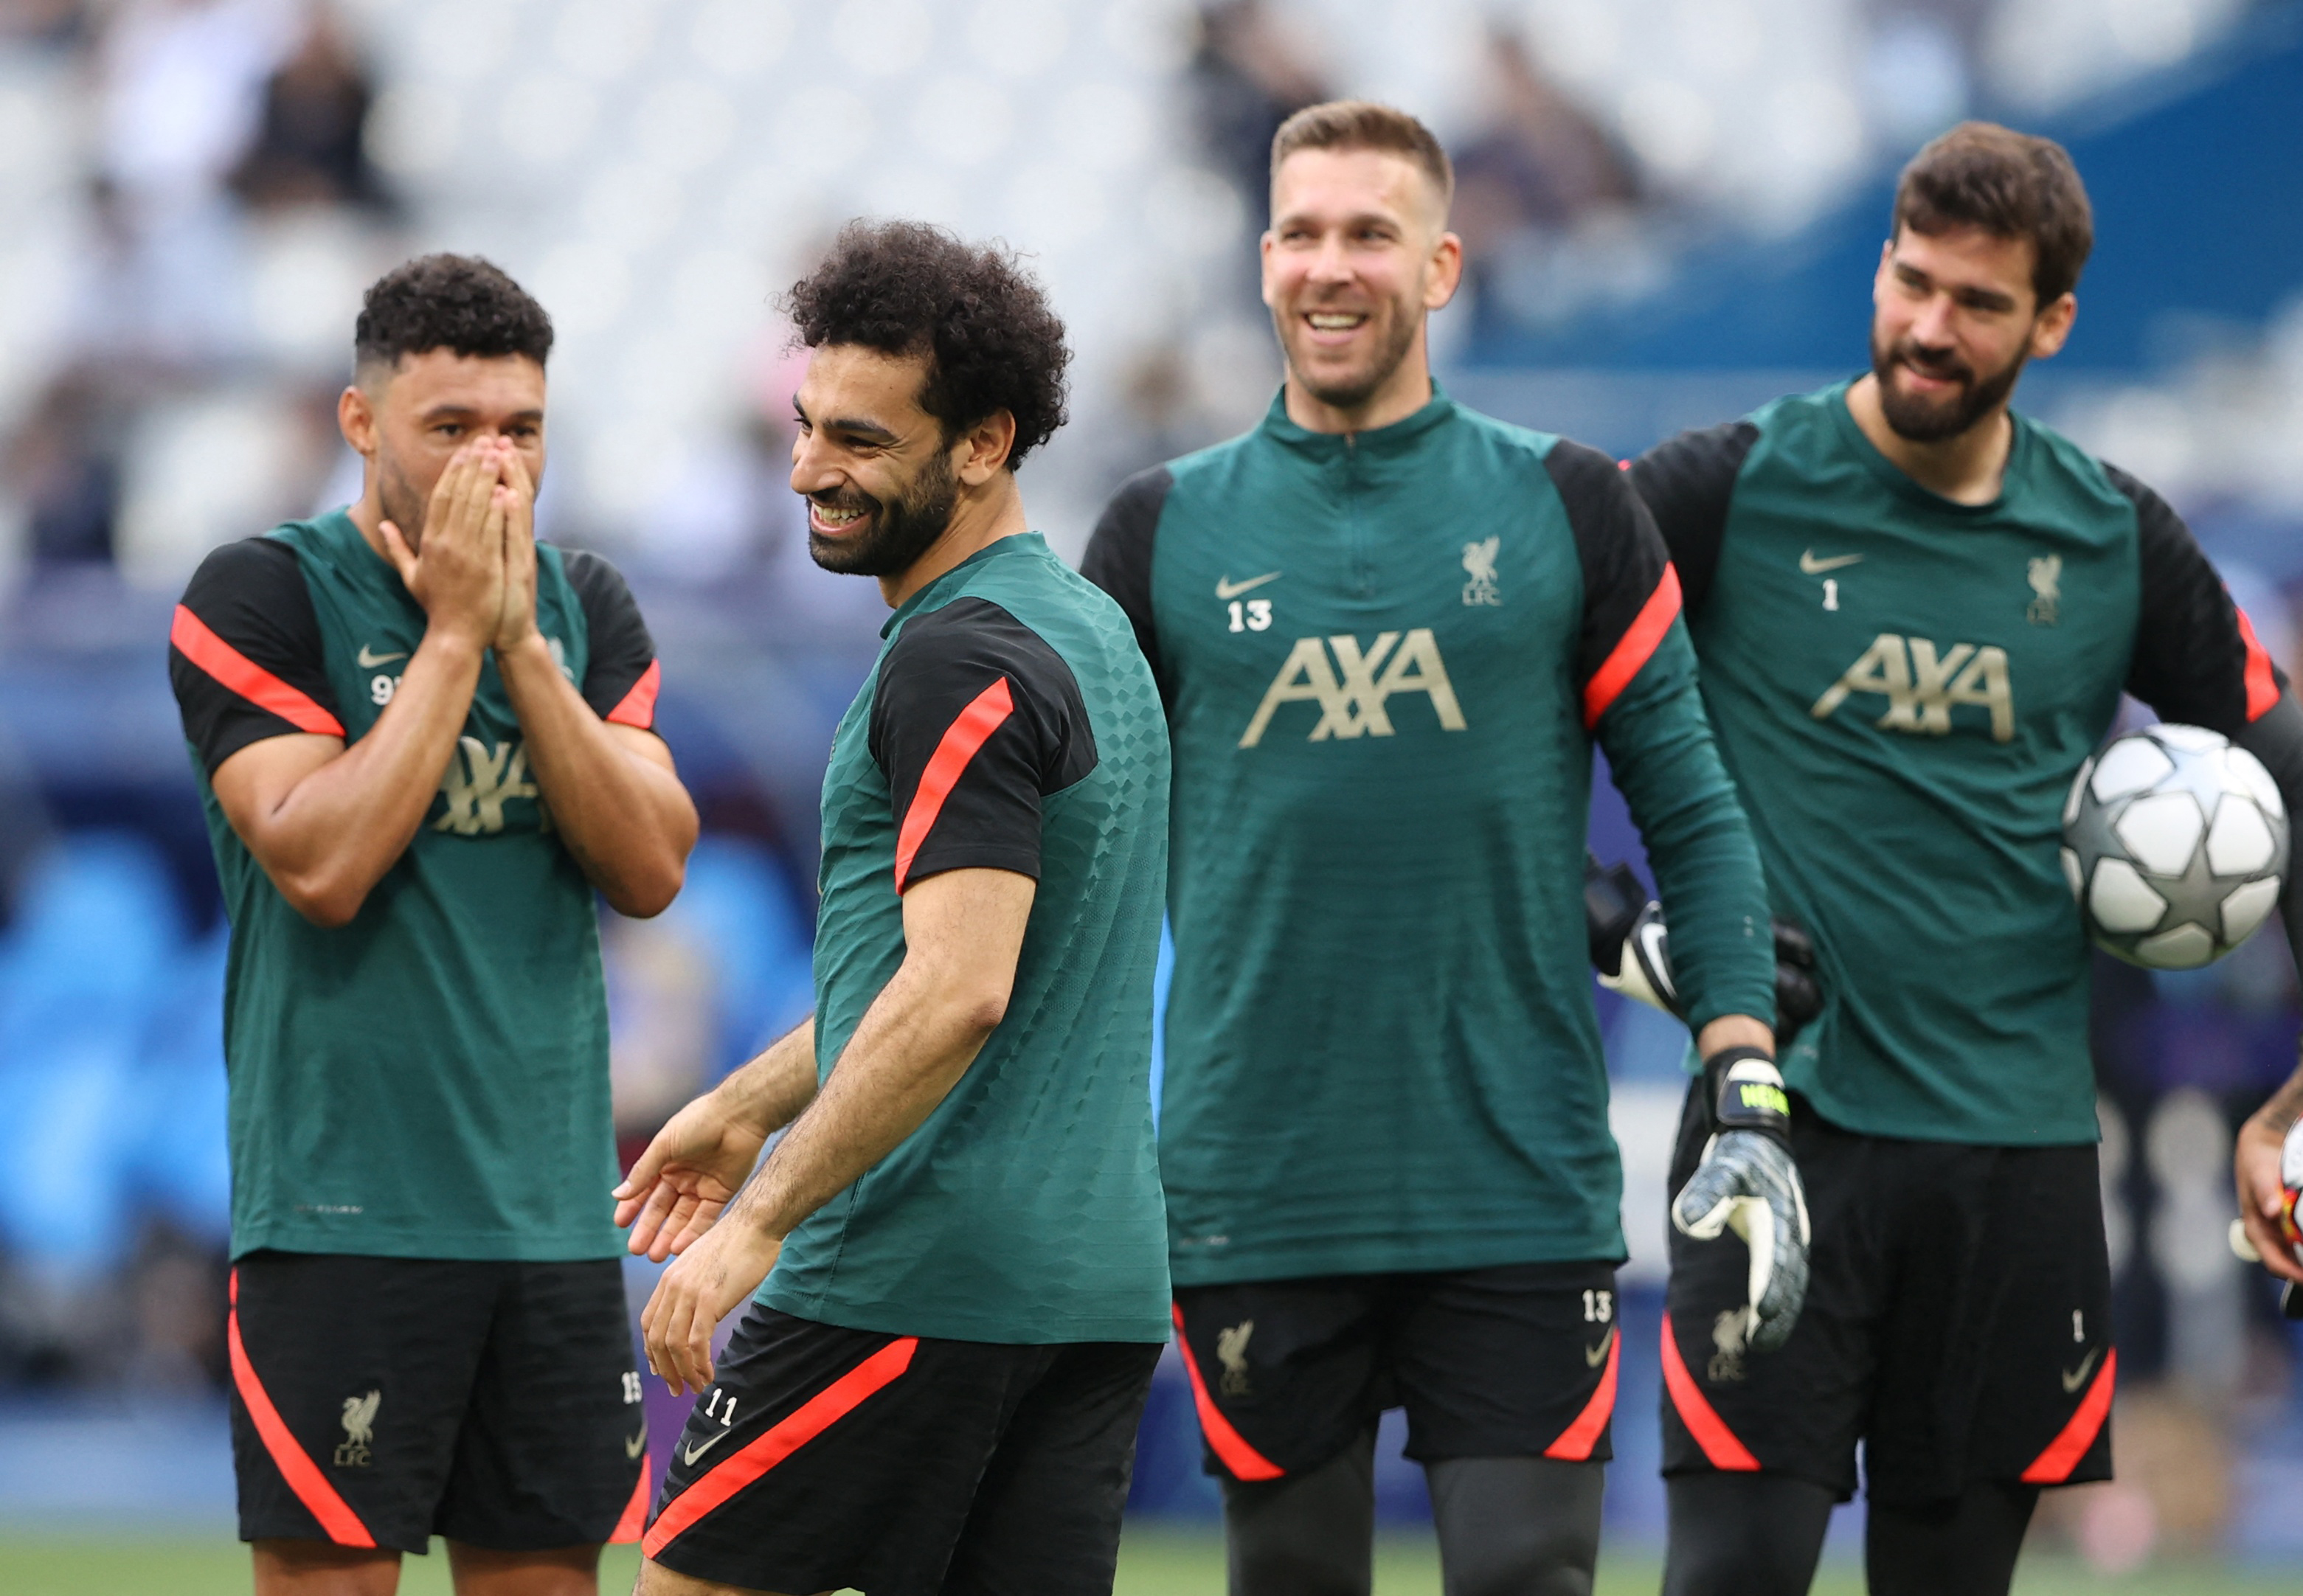 Soccer Football - Champions League Final - Liverpool Training - Stade de France, Saint-Denis near Paris, France - May 27, 2022 Liverpool's Mohamed Salah, Alex Oxlade-Chamberlain, Adrian and Alisson during training REUTERS/Molly Darlington